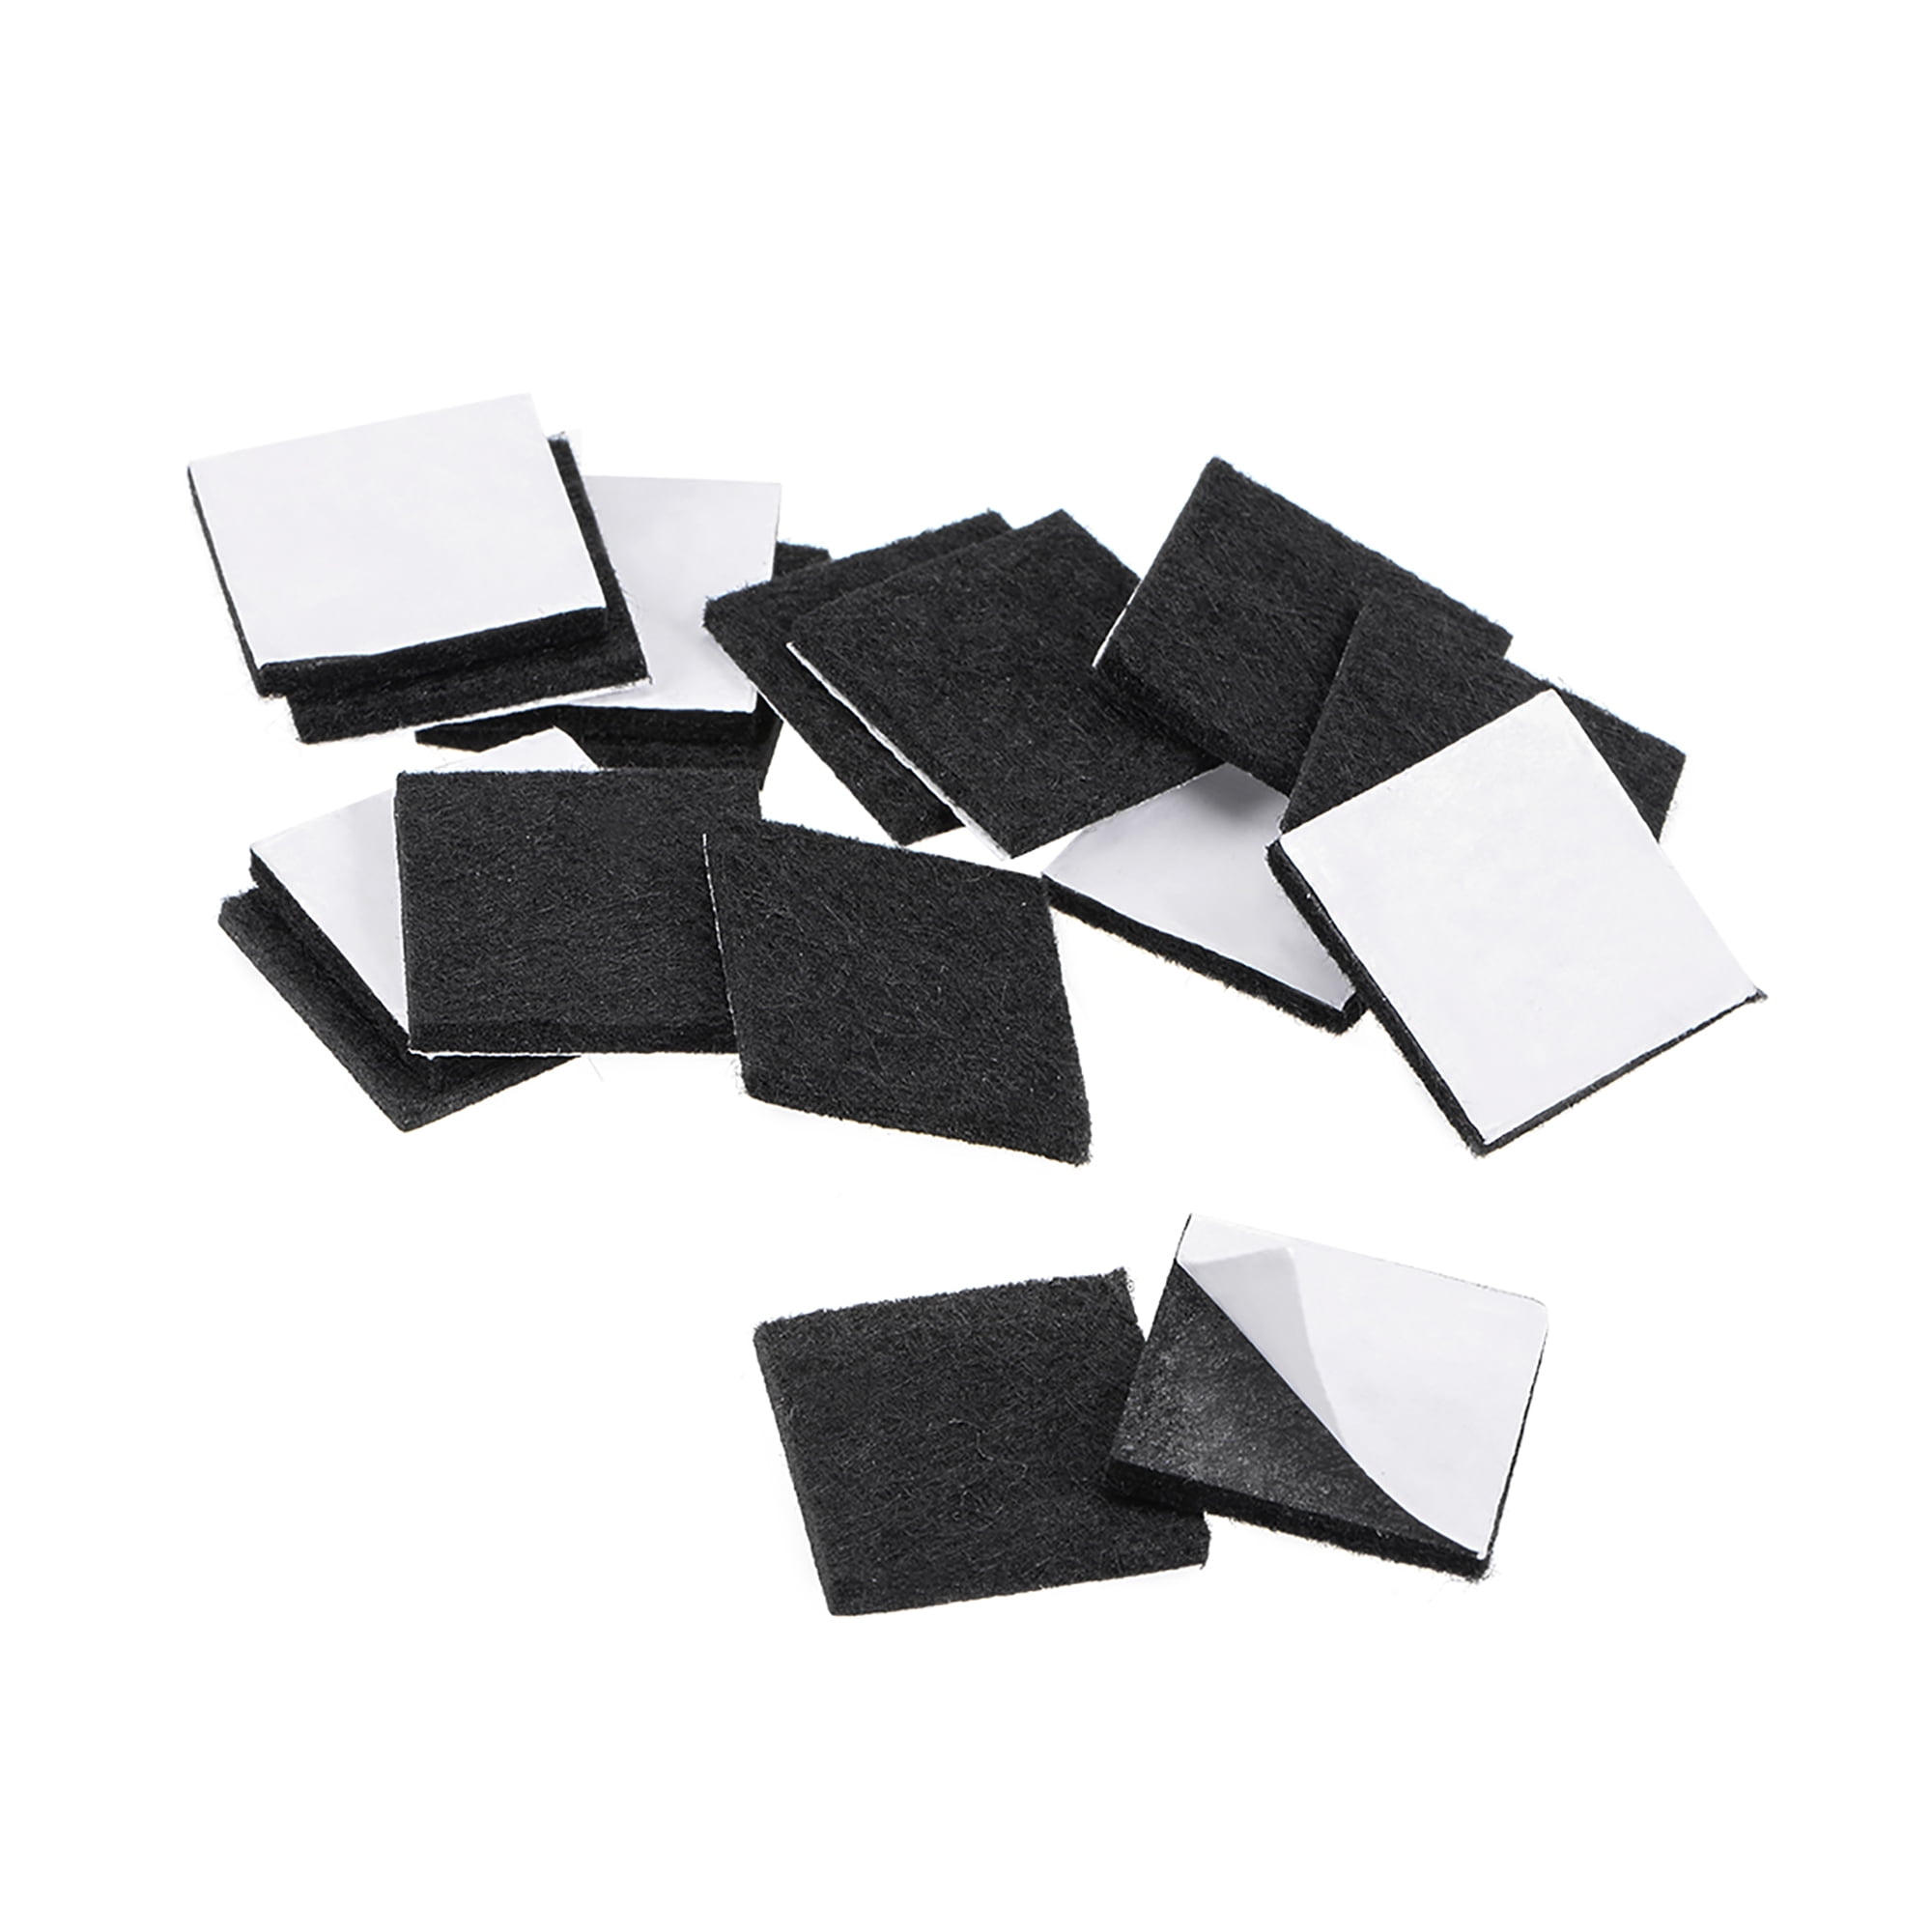 Furniture Pads Adhesive Felt Pads 25mm X 25mm Square 3mm Thick